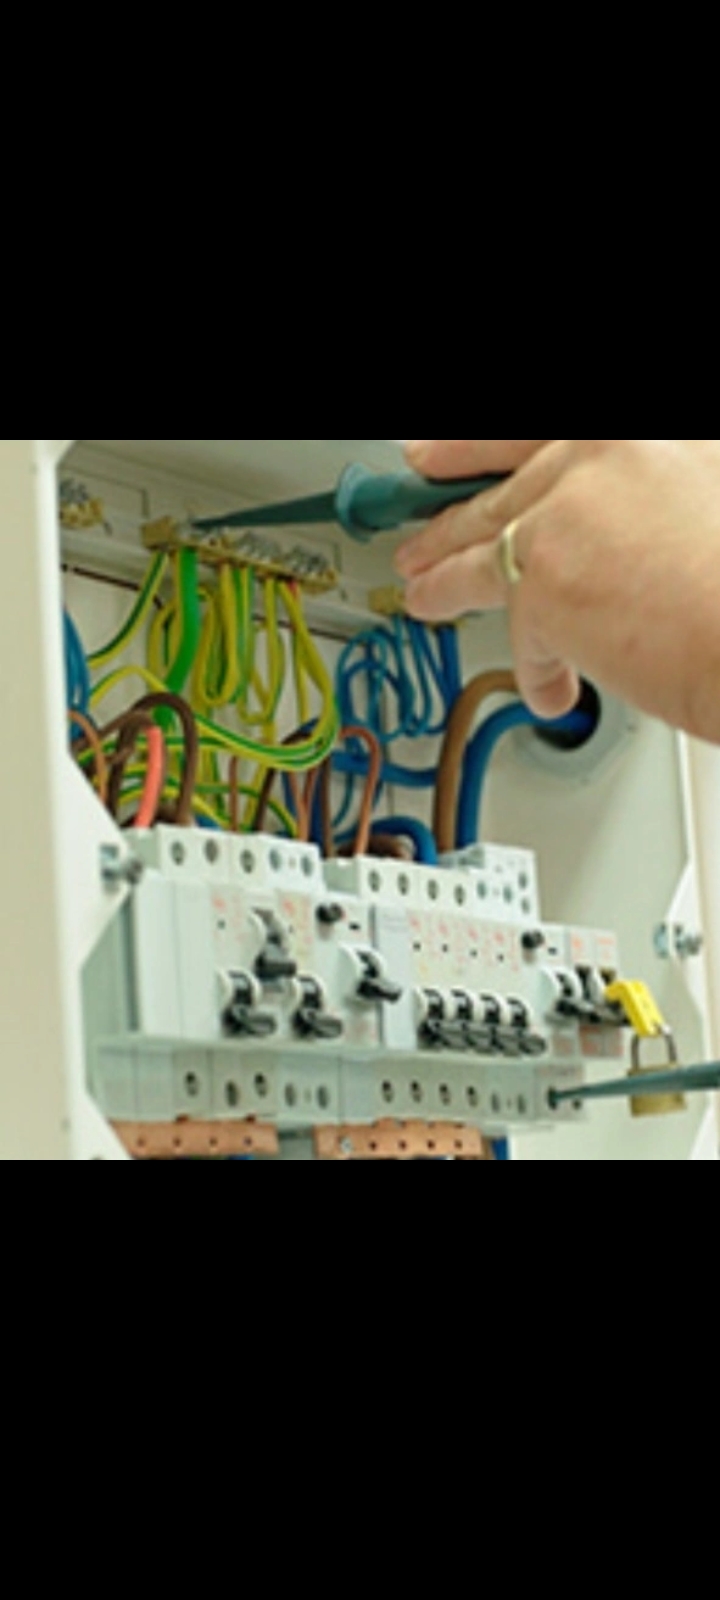 Electrical testing fault finding and problem solving  image